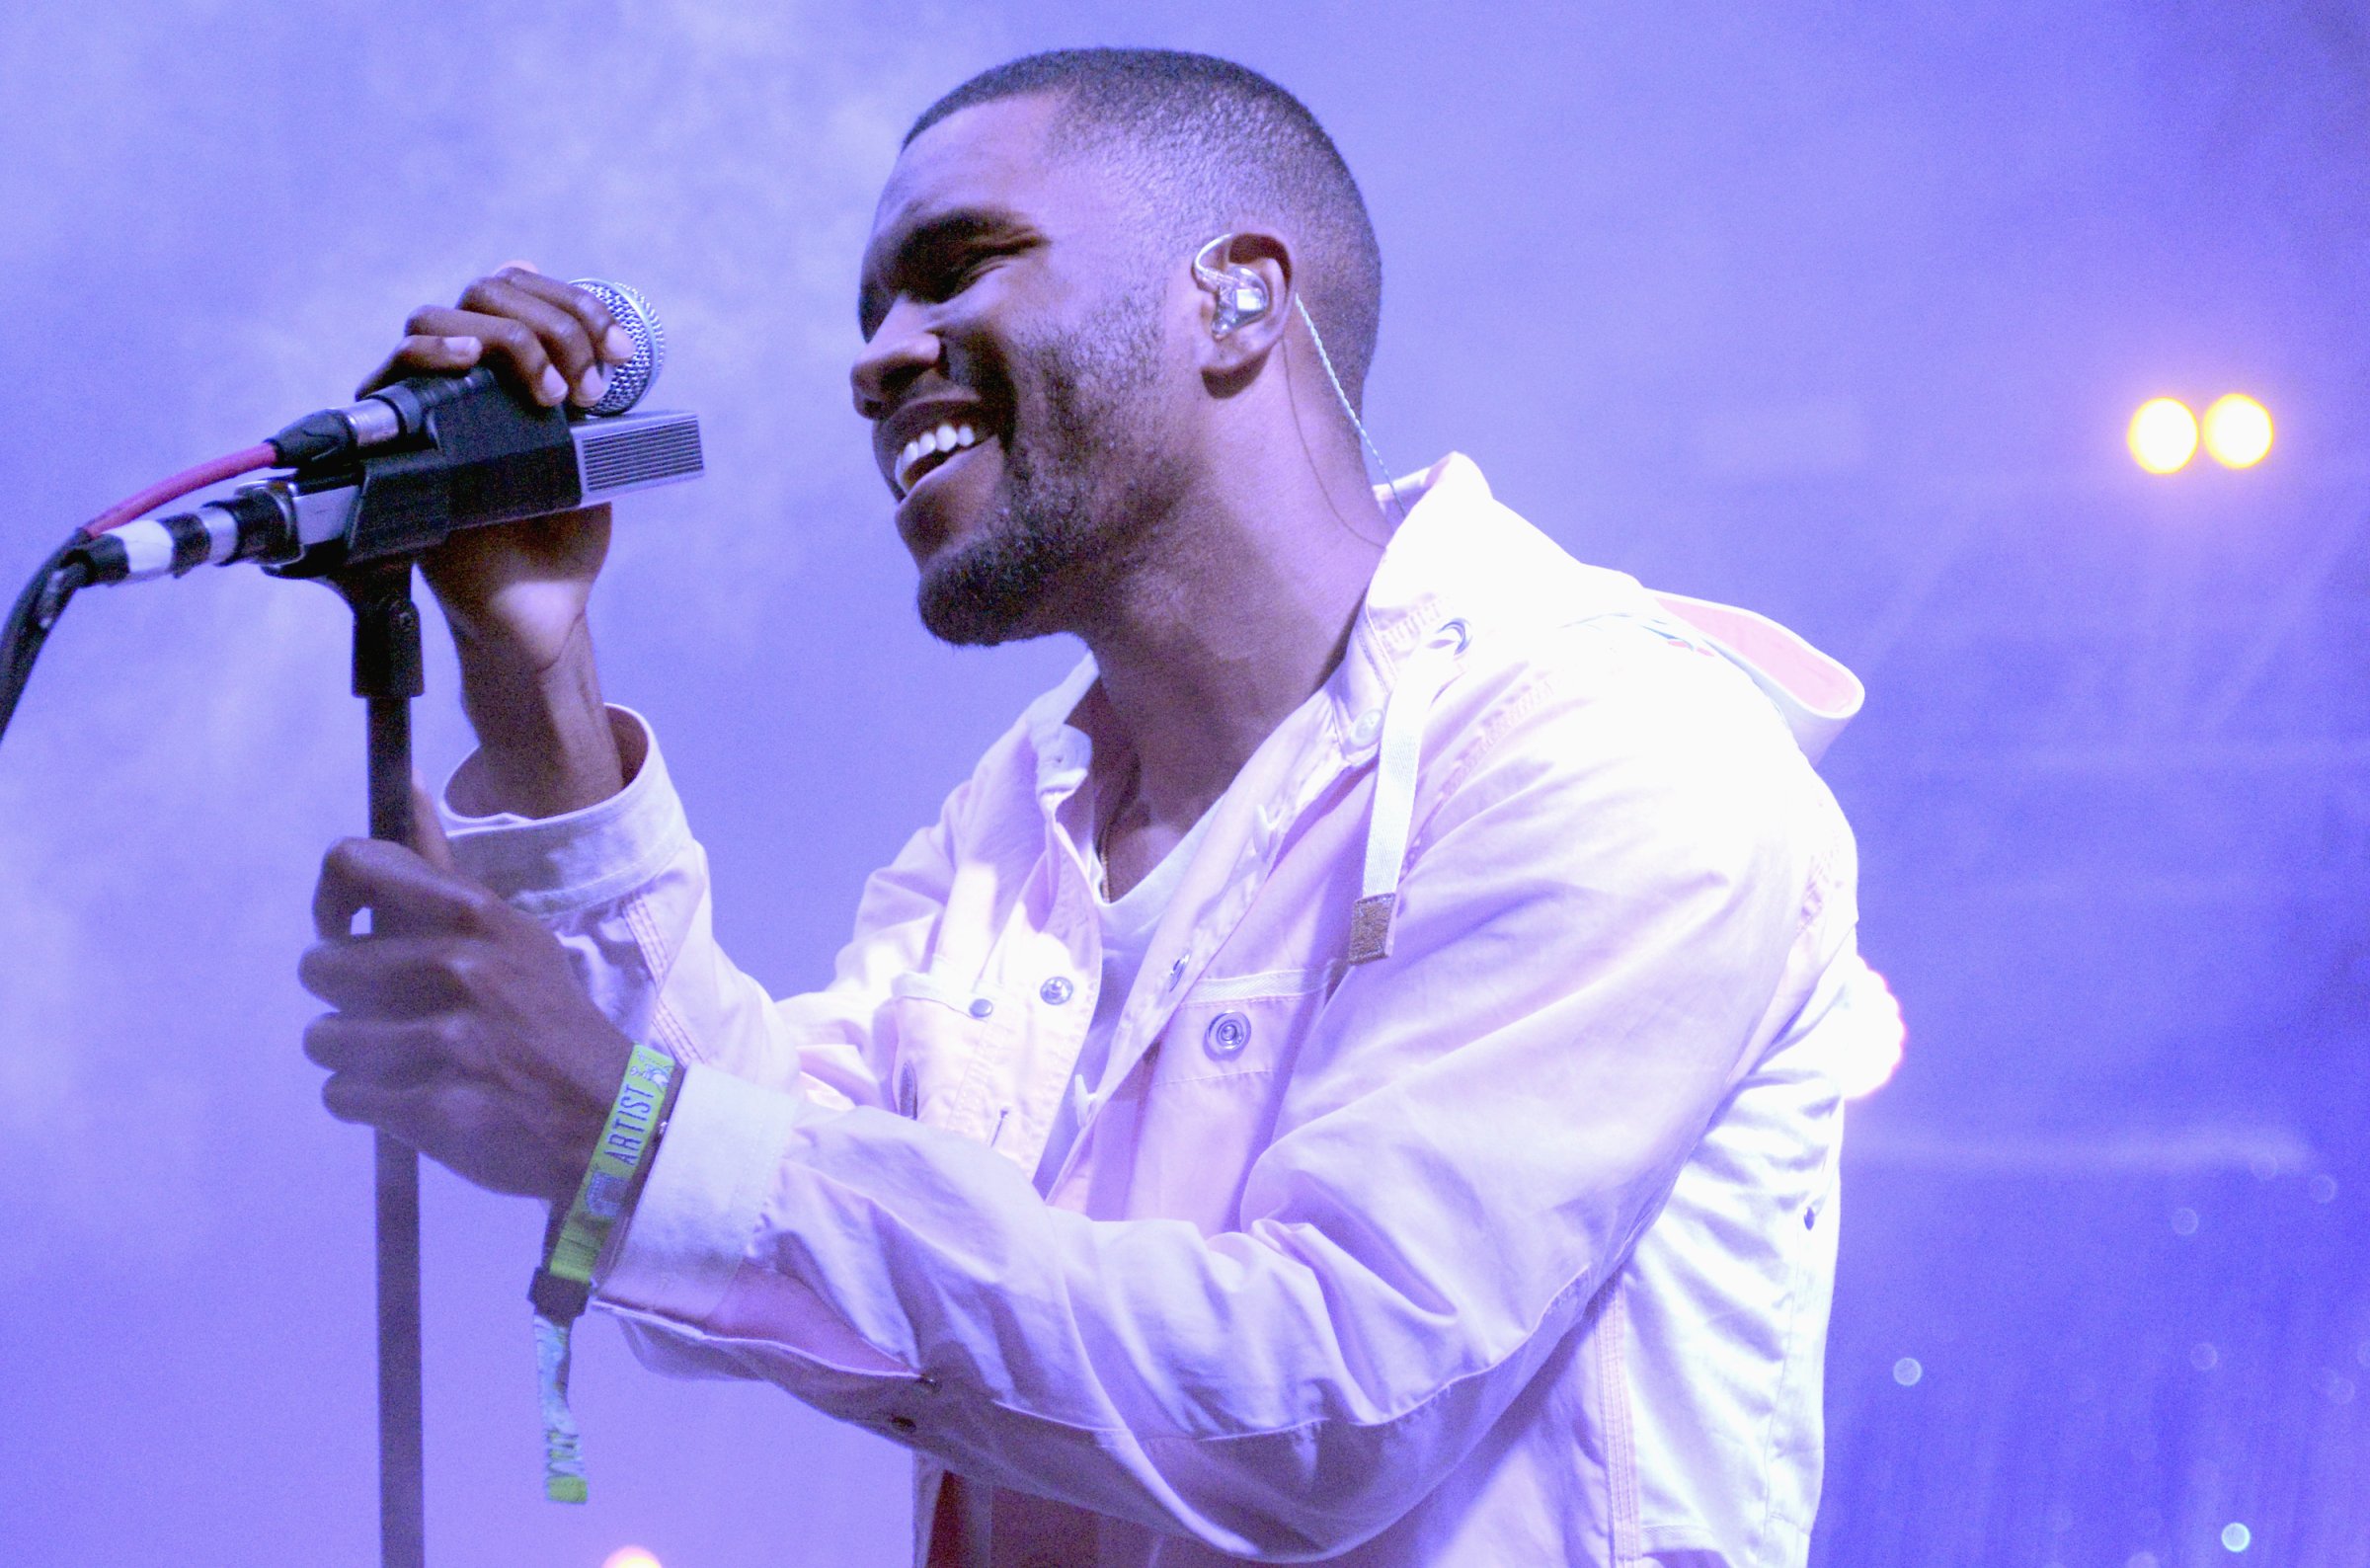 Frank Ocean during the performs during the 2014 Bonnaroo Music &amp; Arts Festival in Manchester, Tennessee, on June 14, 2014.